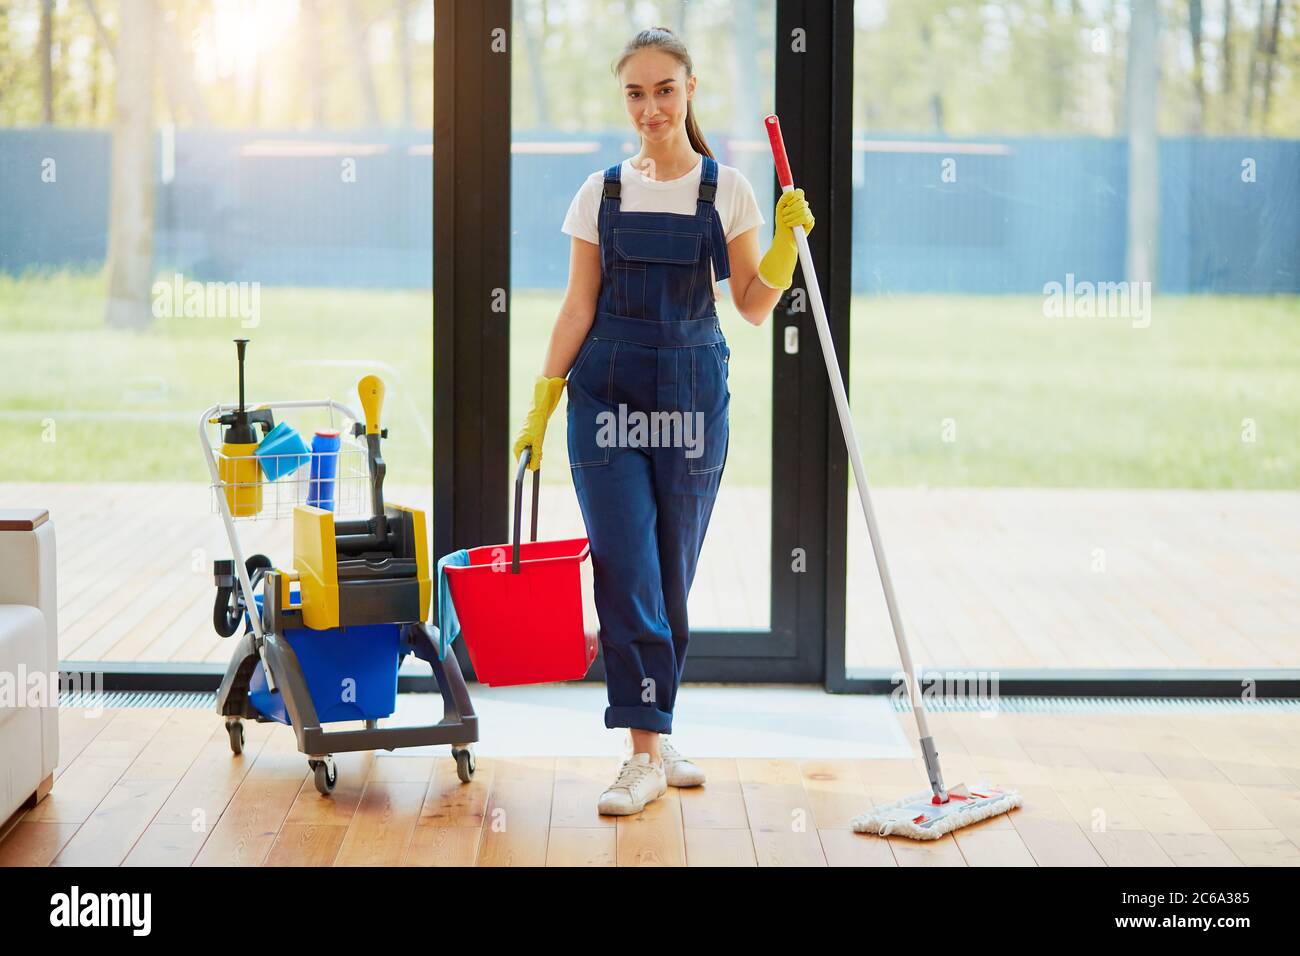 Caucasian woman holding red bucket for floor washing and other equipment for cleaning house. Staff of cleaning service, panoramic window background Stock Photo